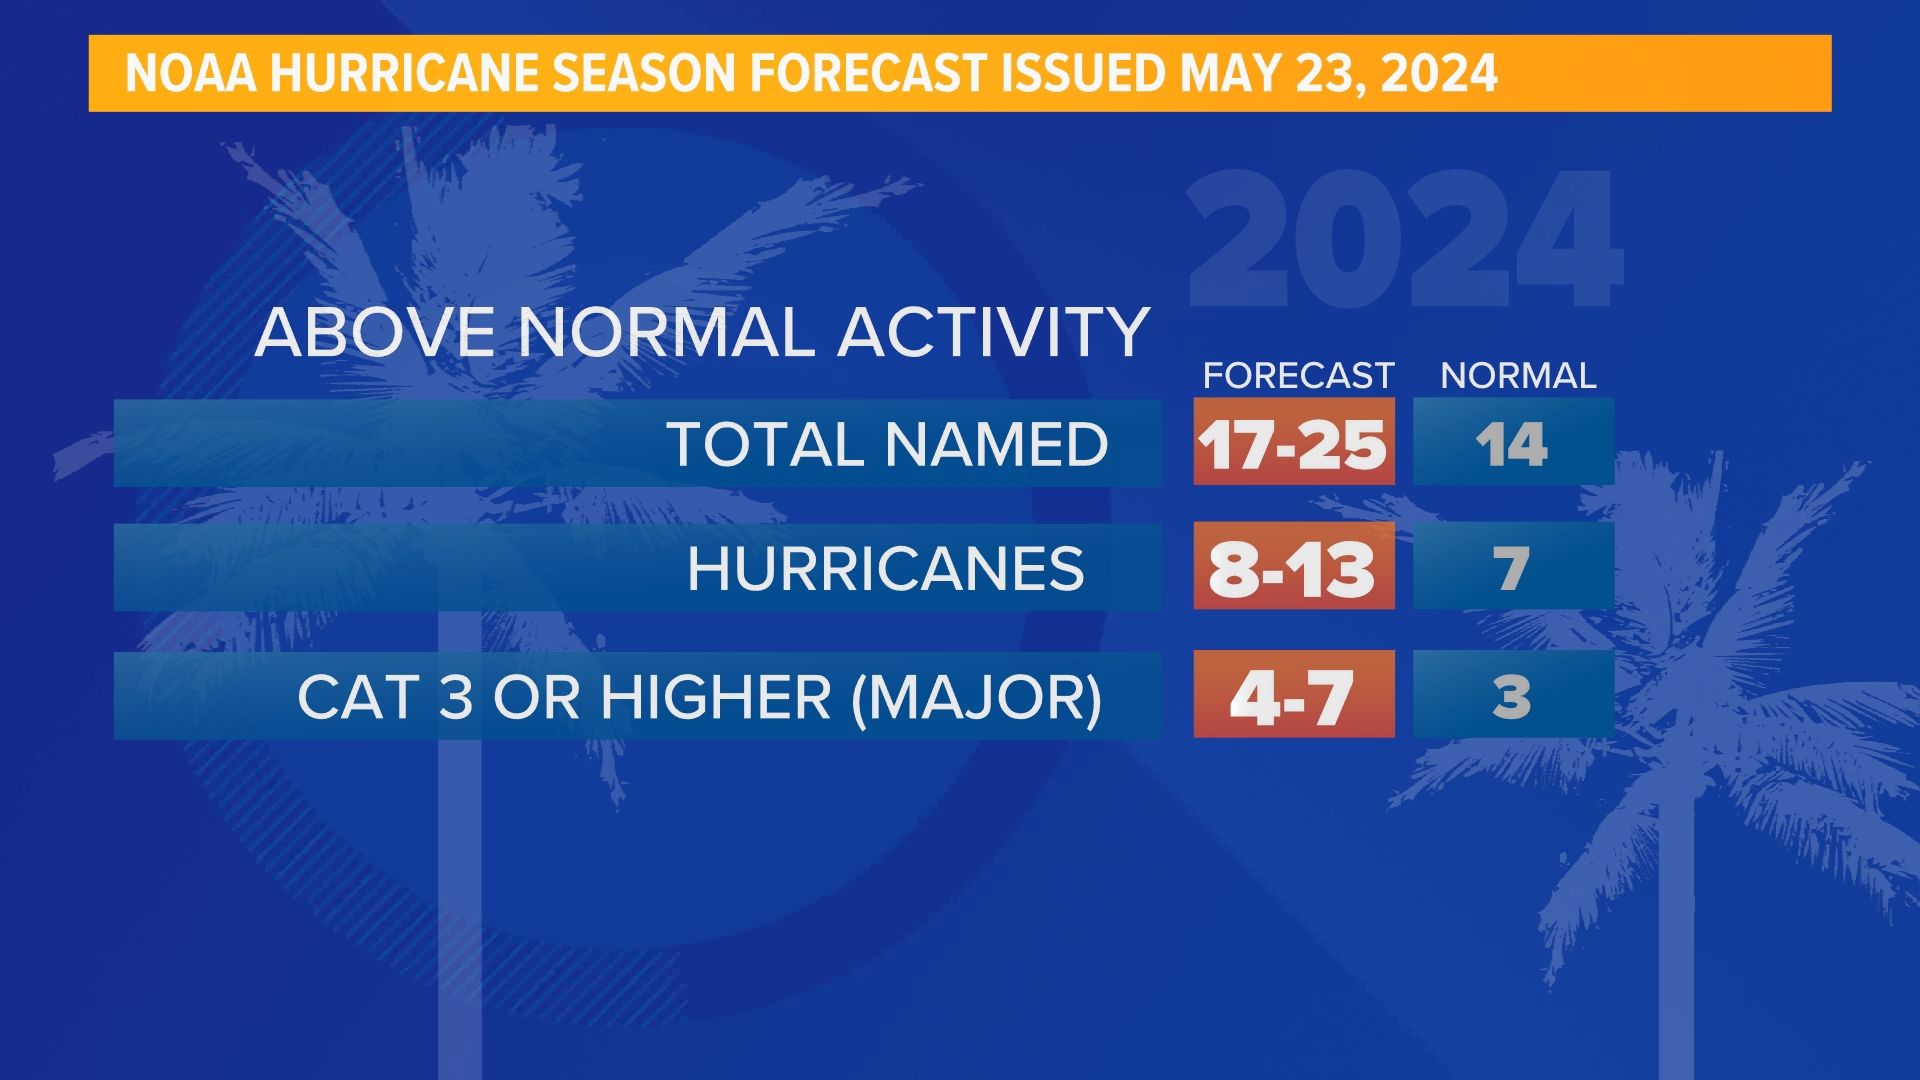 NOAA is calling for 17-25 named storms, including 8-13 hurricanes.